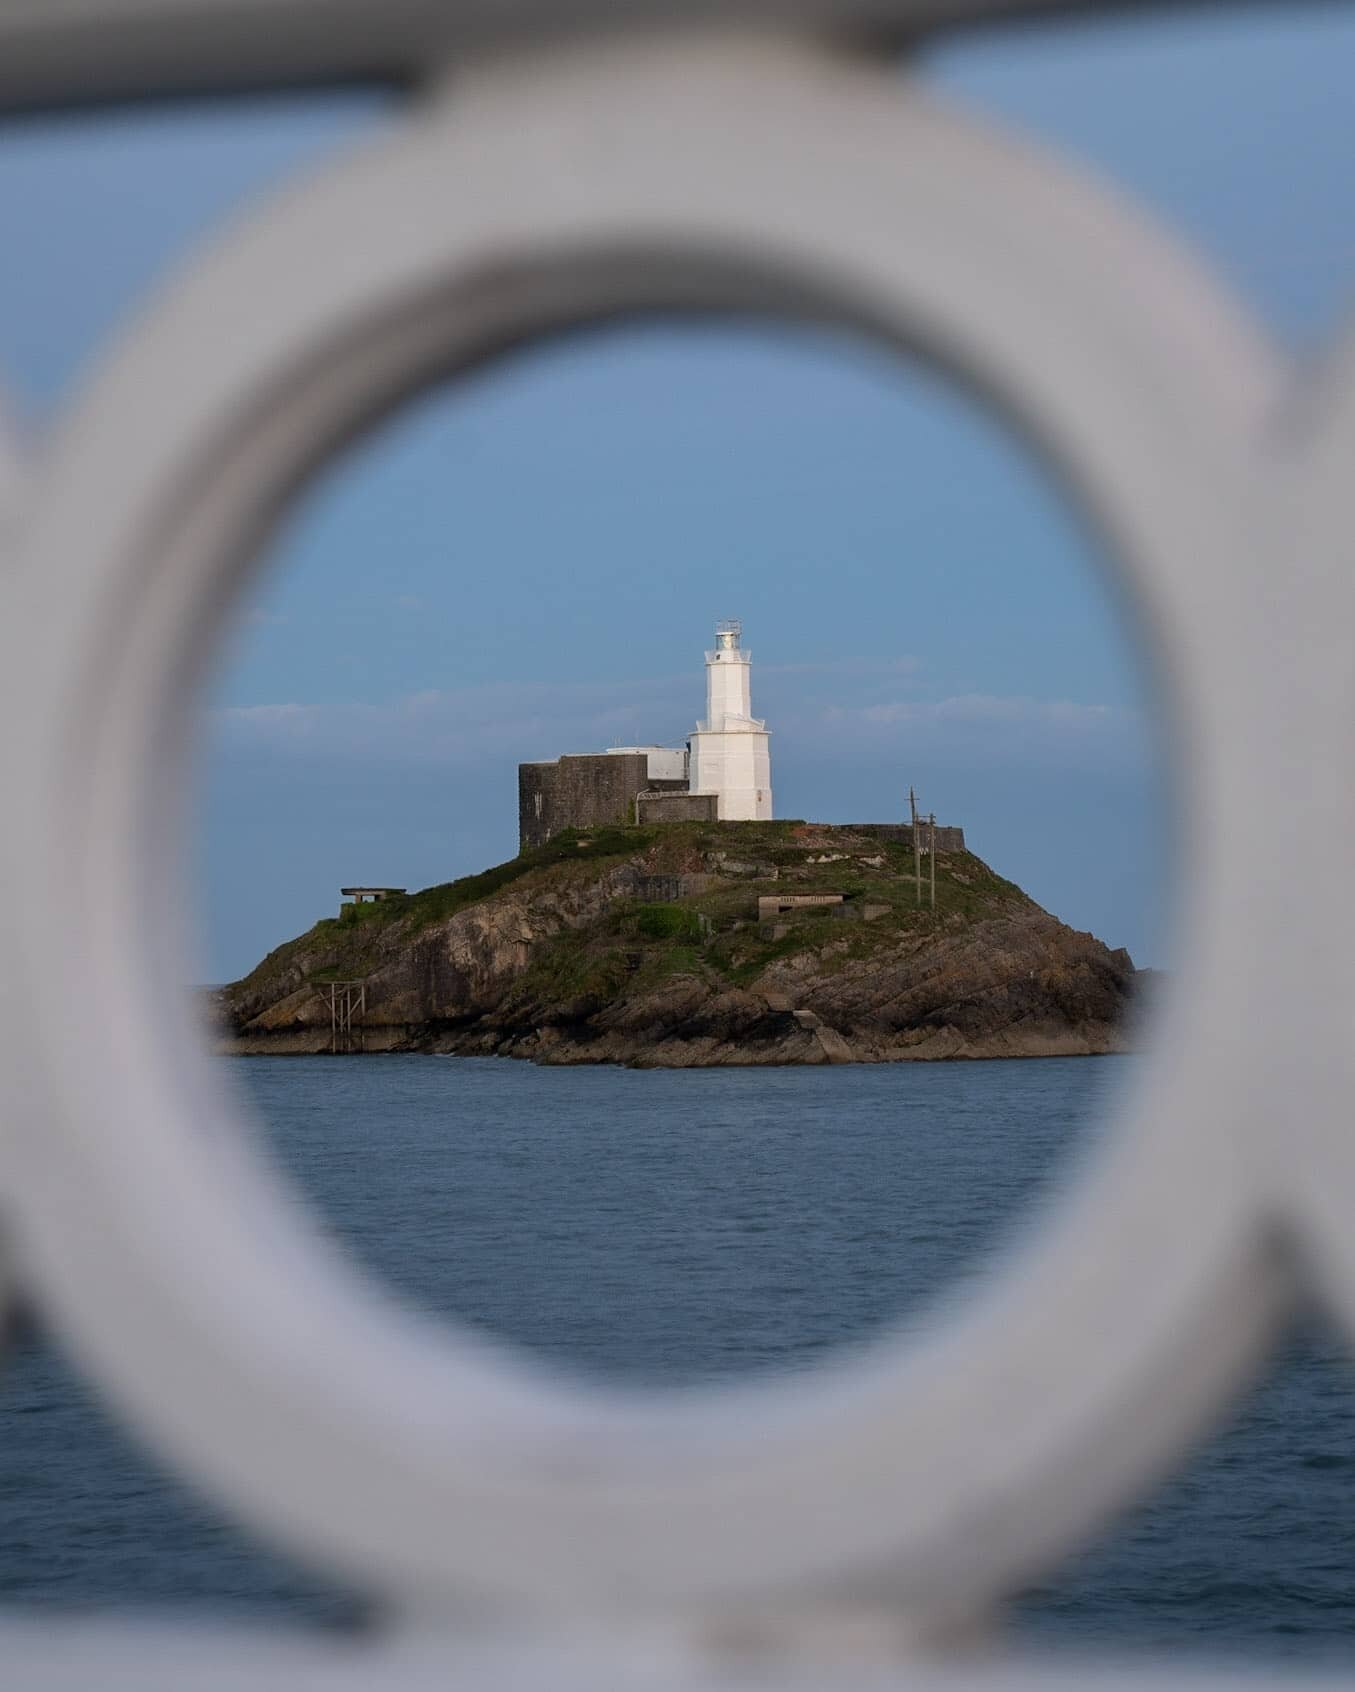 Through the Keyhole ⠀
⠀
Mumbles lighthouse during blue hour from a different perspective. ⠀
⠀
Currently in the Lake District for a week after two weeks driving around the west coast of Scotland.⠀
⠀
So much content to go through and edit which I'm goi